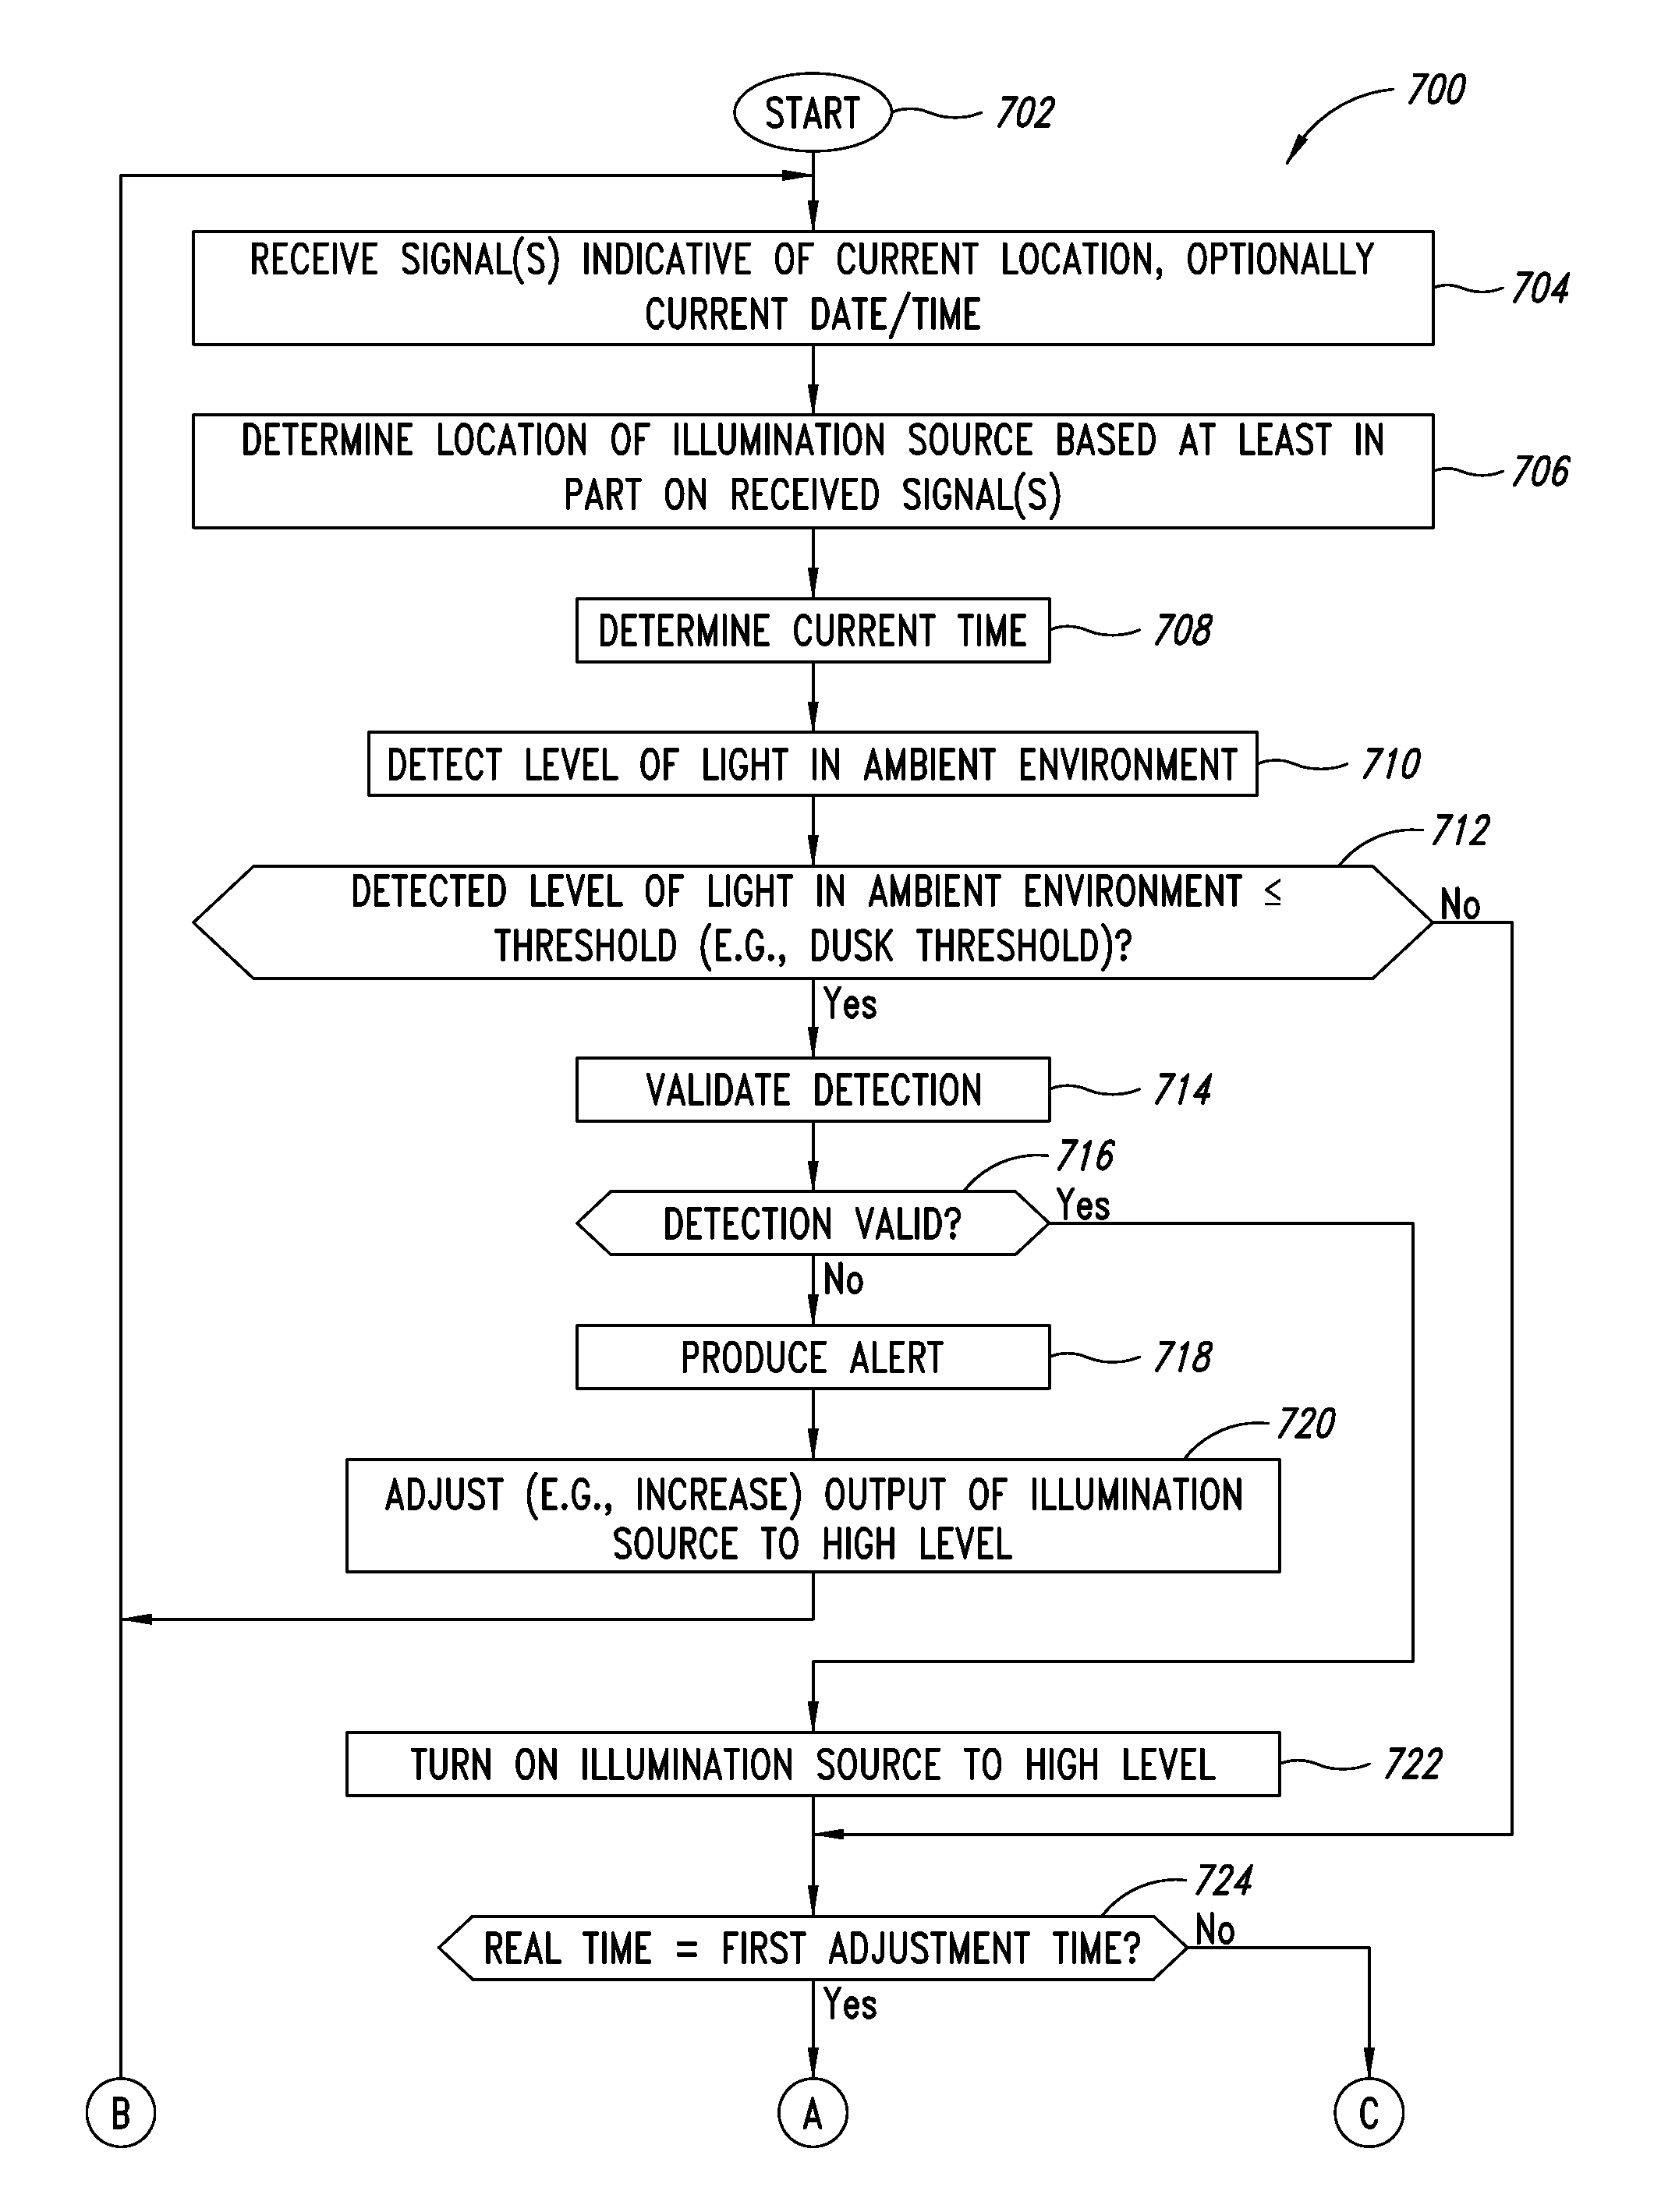 Apparatus and method of energy efficient illumination using received signals